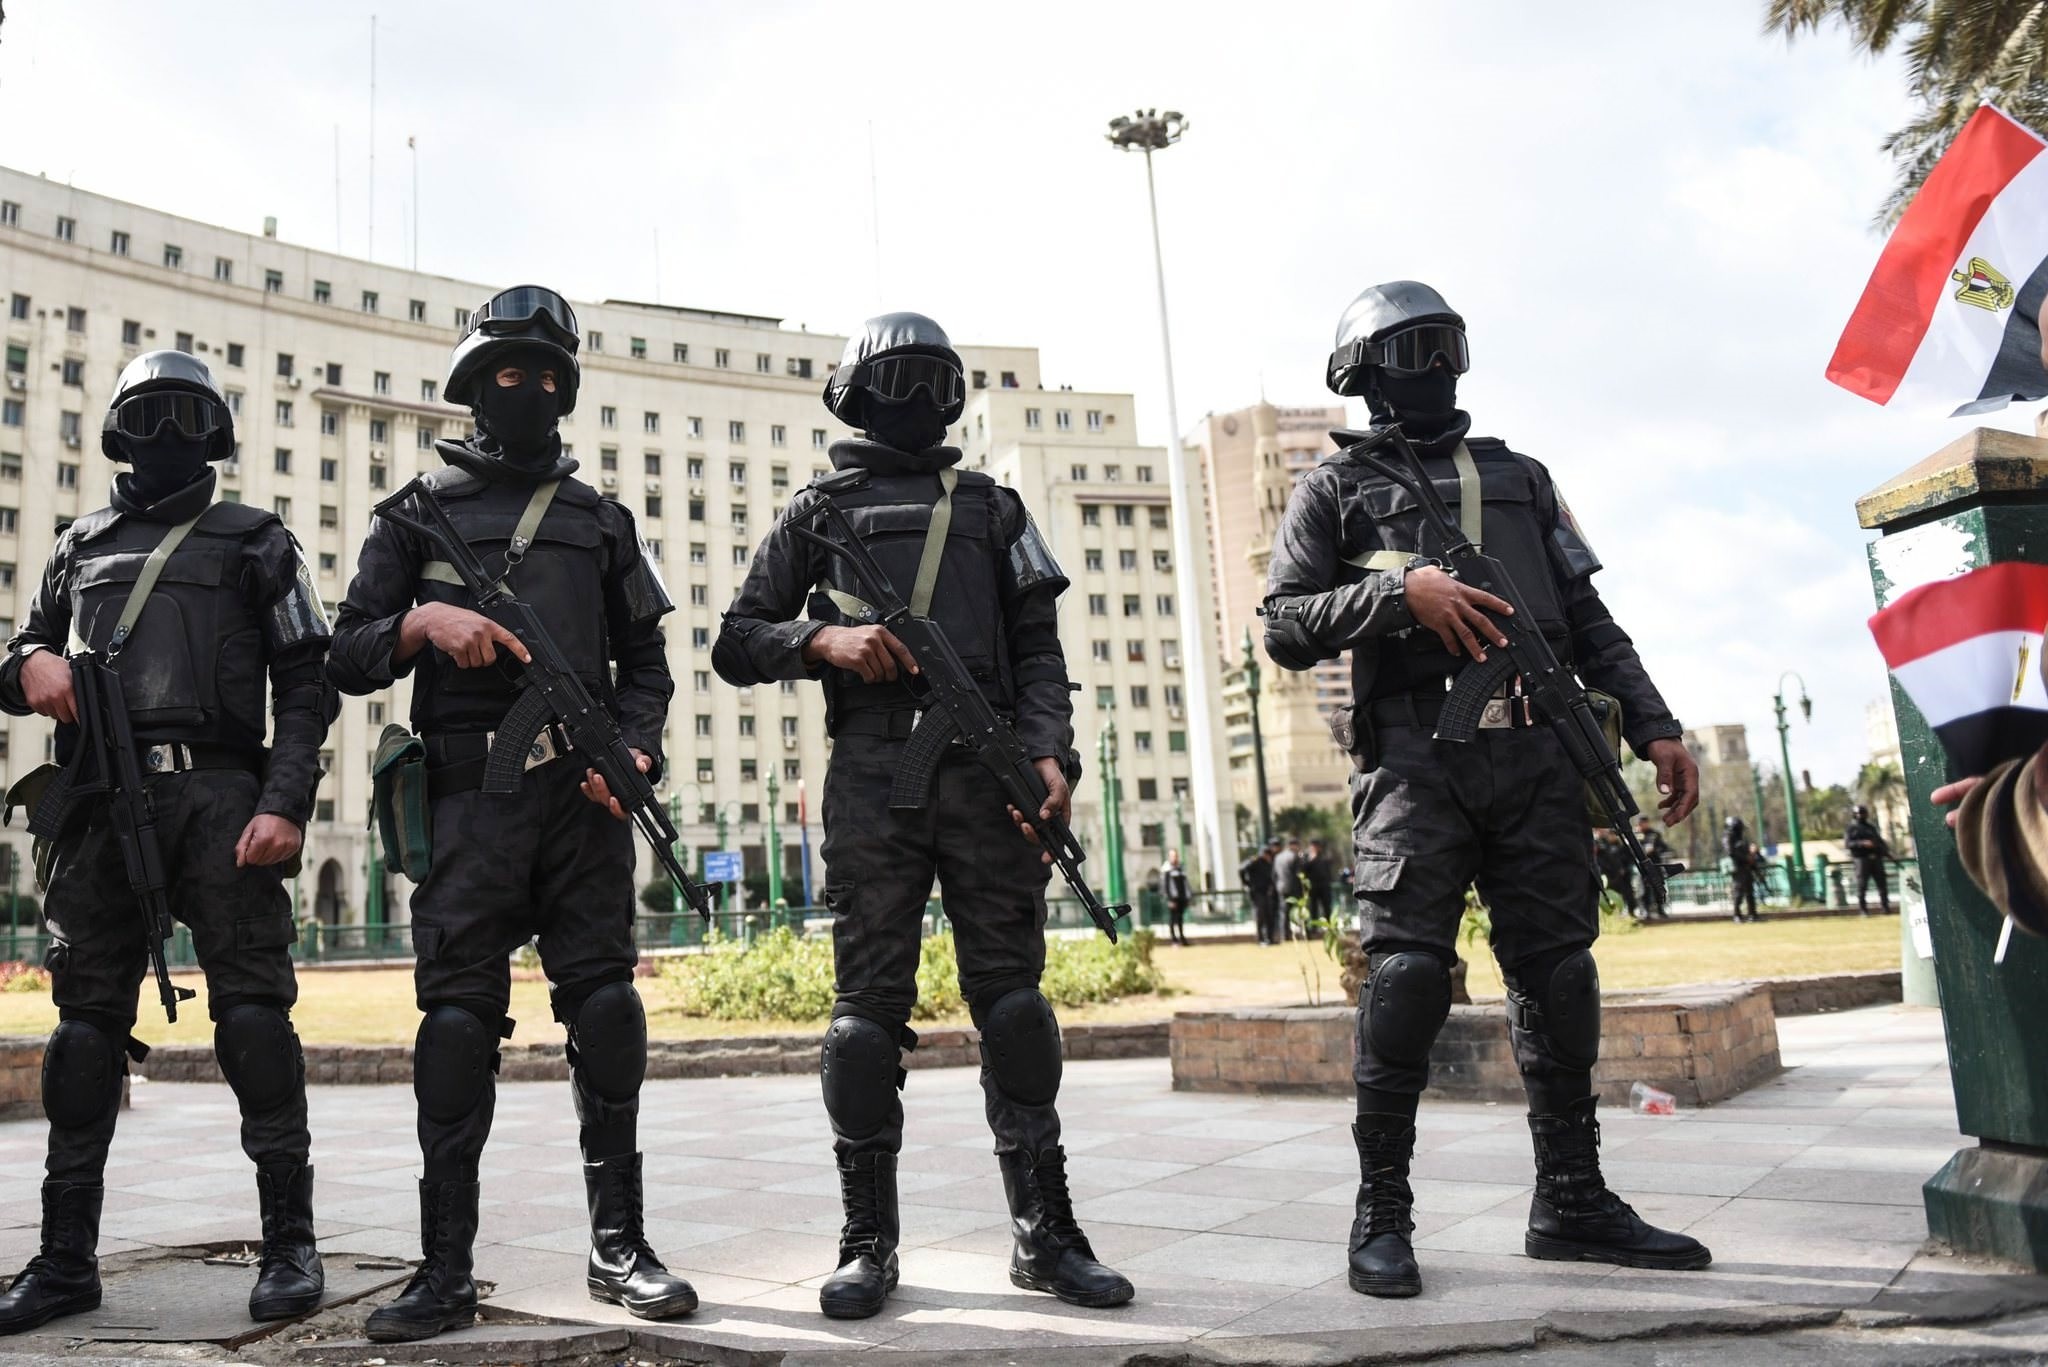 Members of the Egyptian police special forces stand guard on Cairo's landmark Tahrir Square on January 25, 2016, as the country marks the fifth anniversary of the 2011 uprising. (AFP Photo)